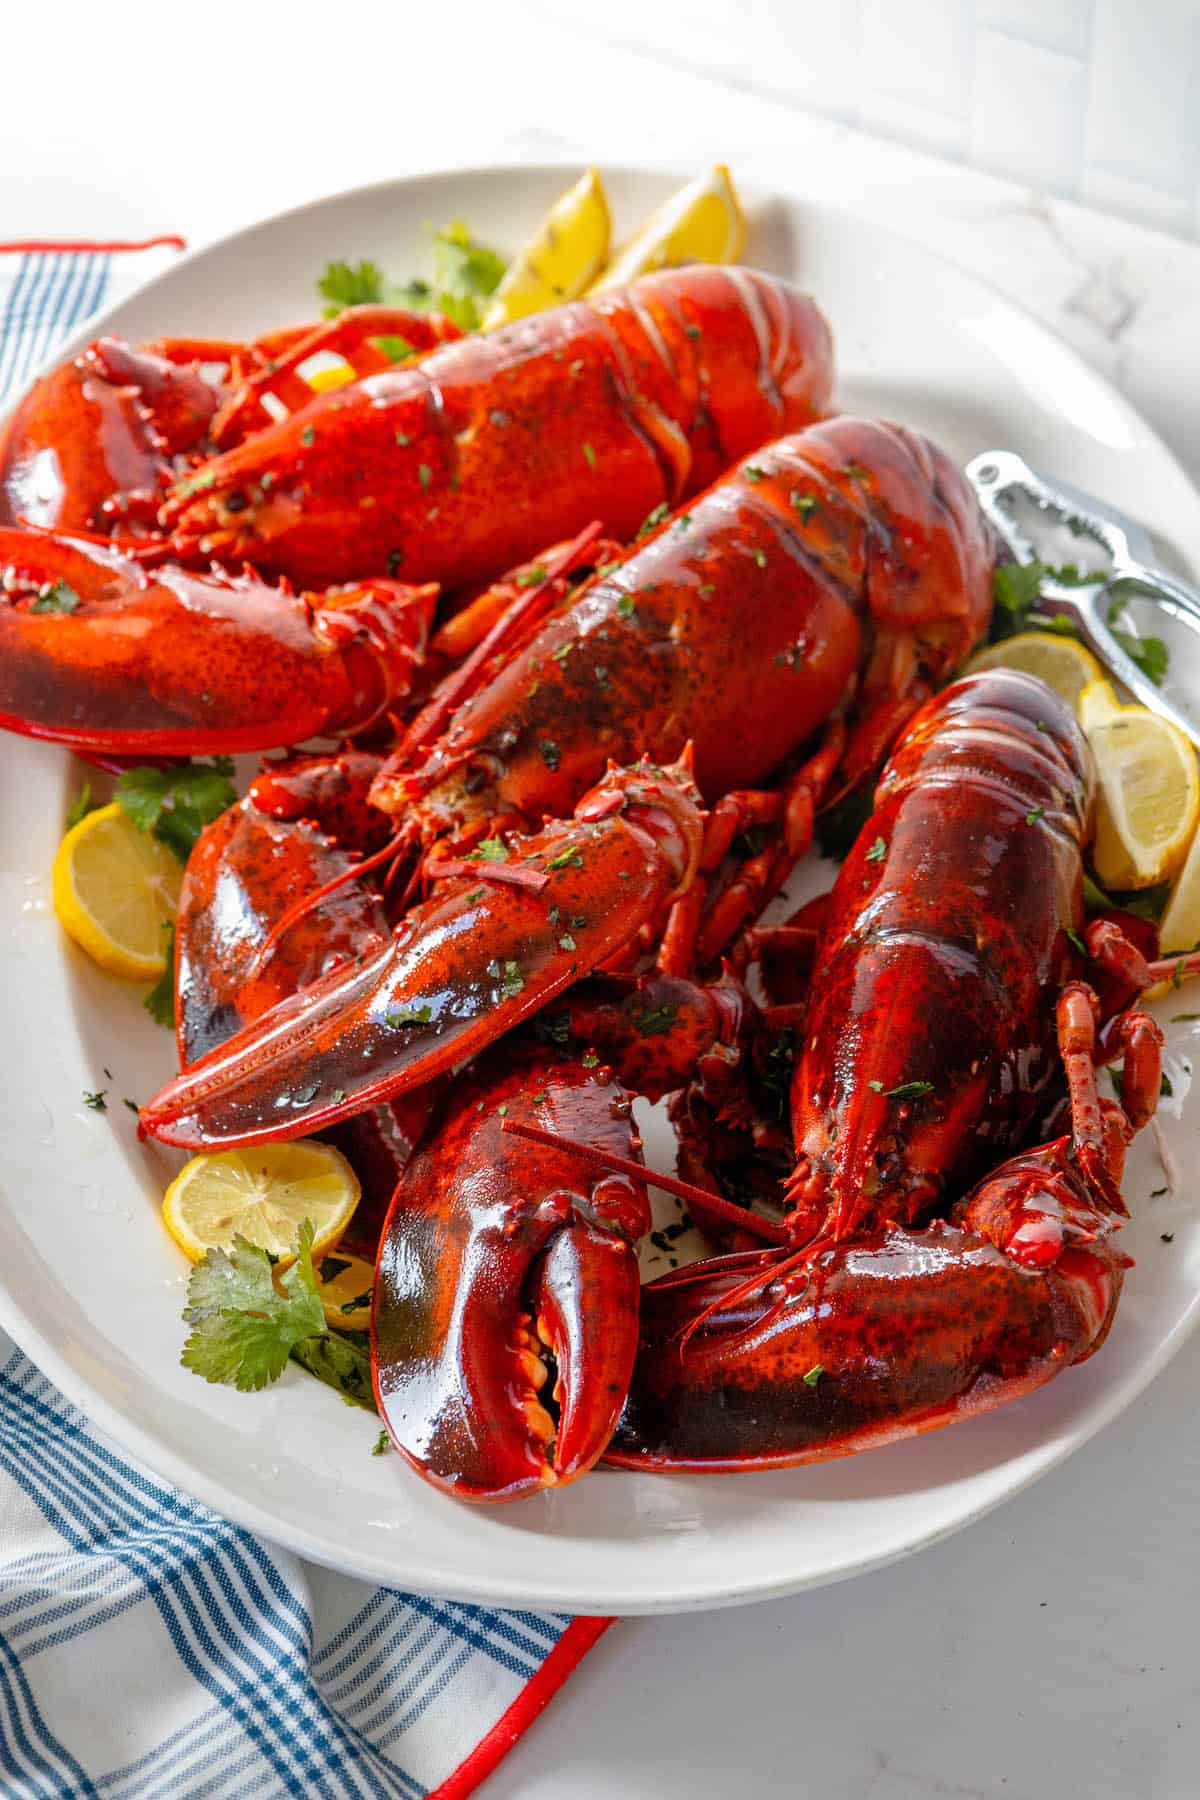 Lobsters cooked to perfection, displayed on a white plate with lemon wedges.